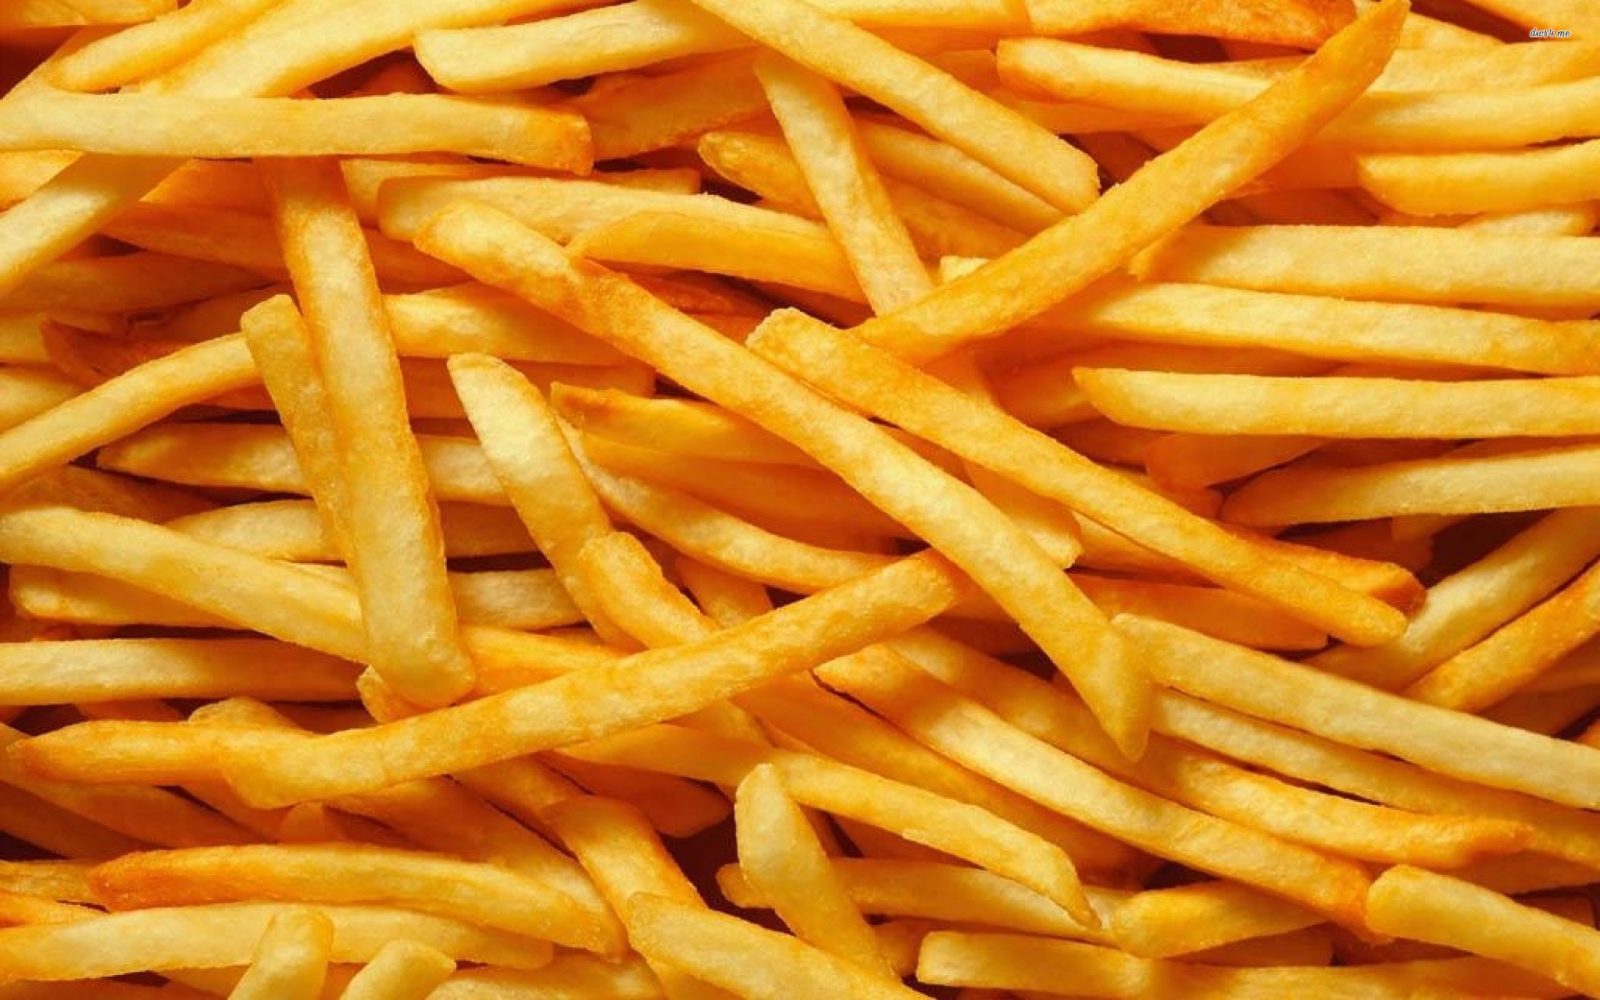 🥔 Can We Guess Your Generation Based on the Different Ways You’ve Eaten Potatoes? French Fries